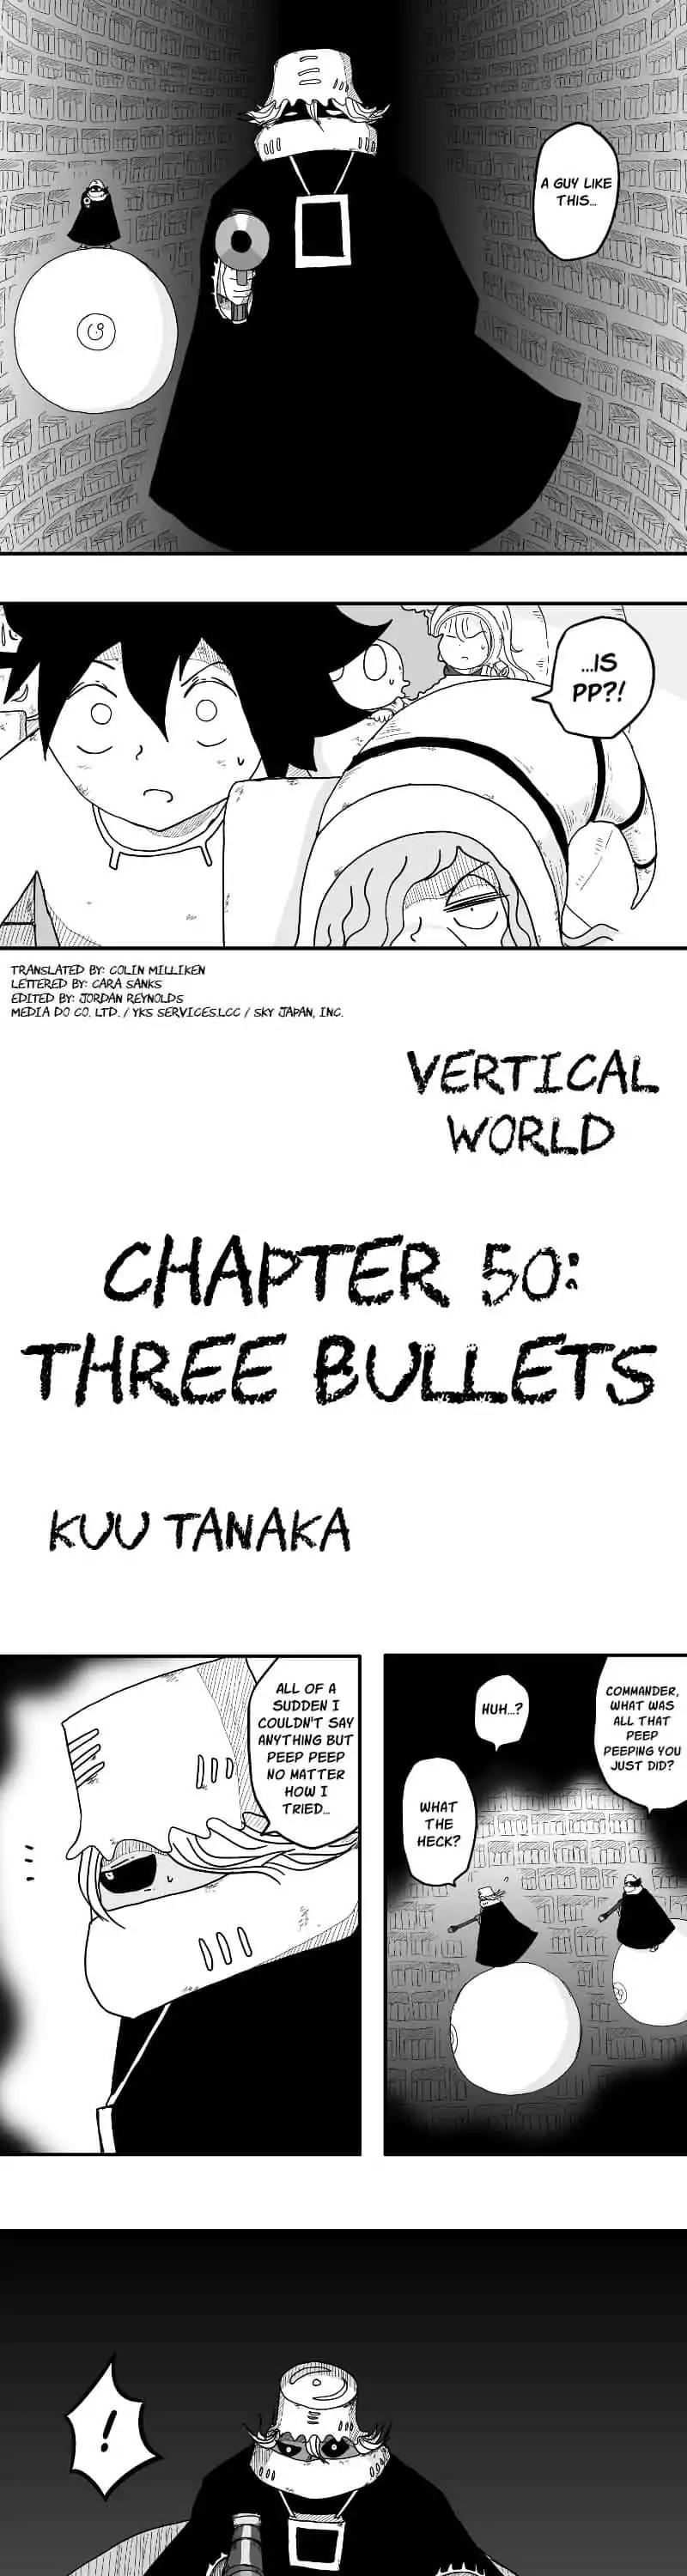 The Vertical World Chapter 50: